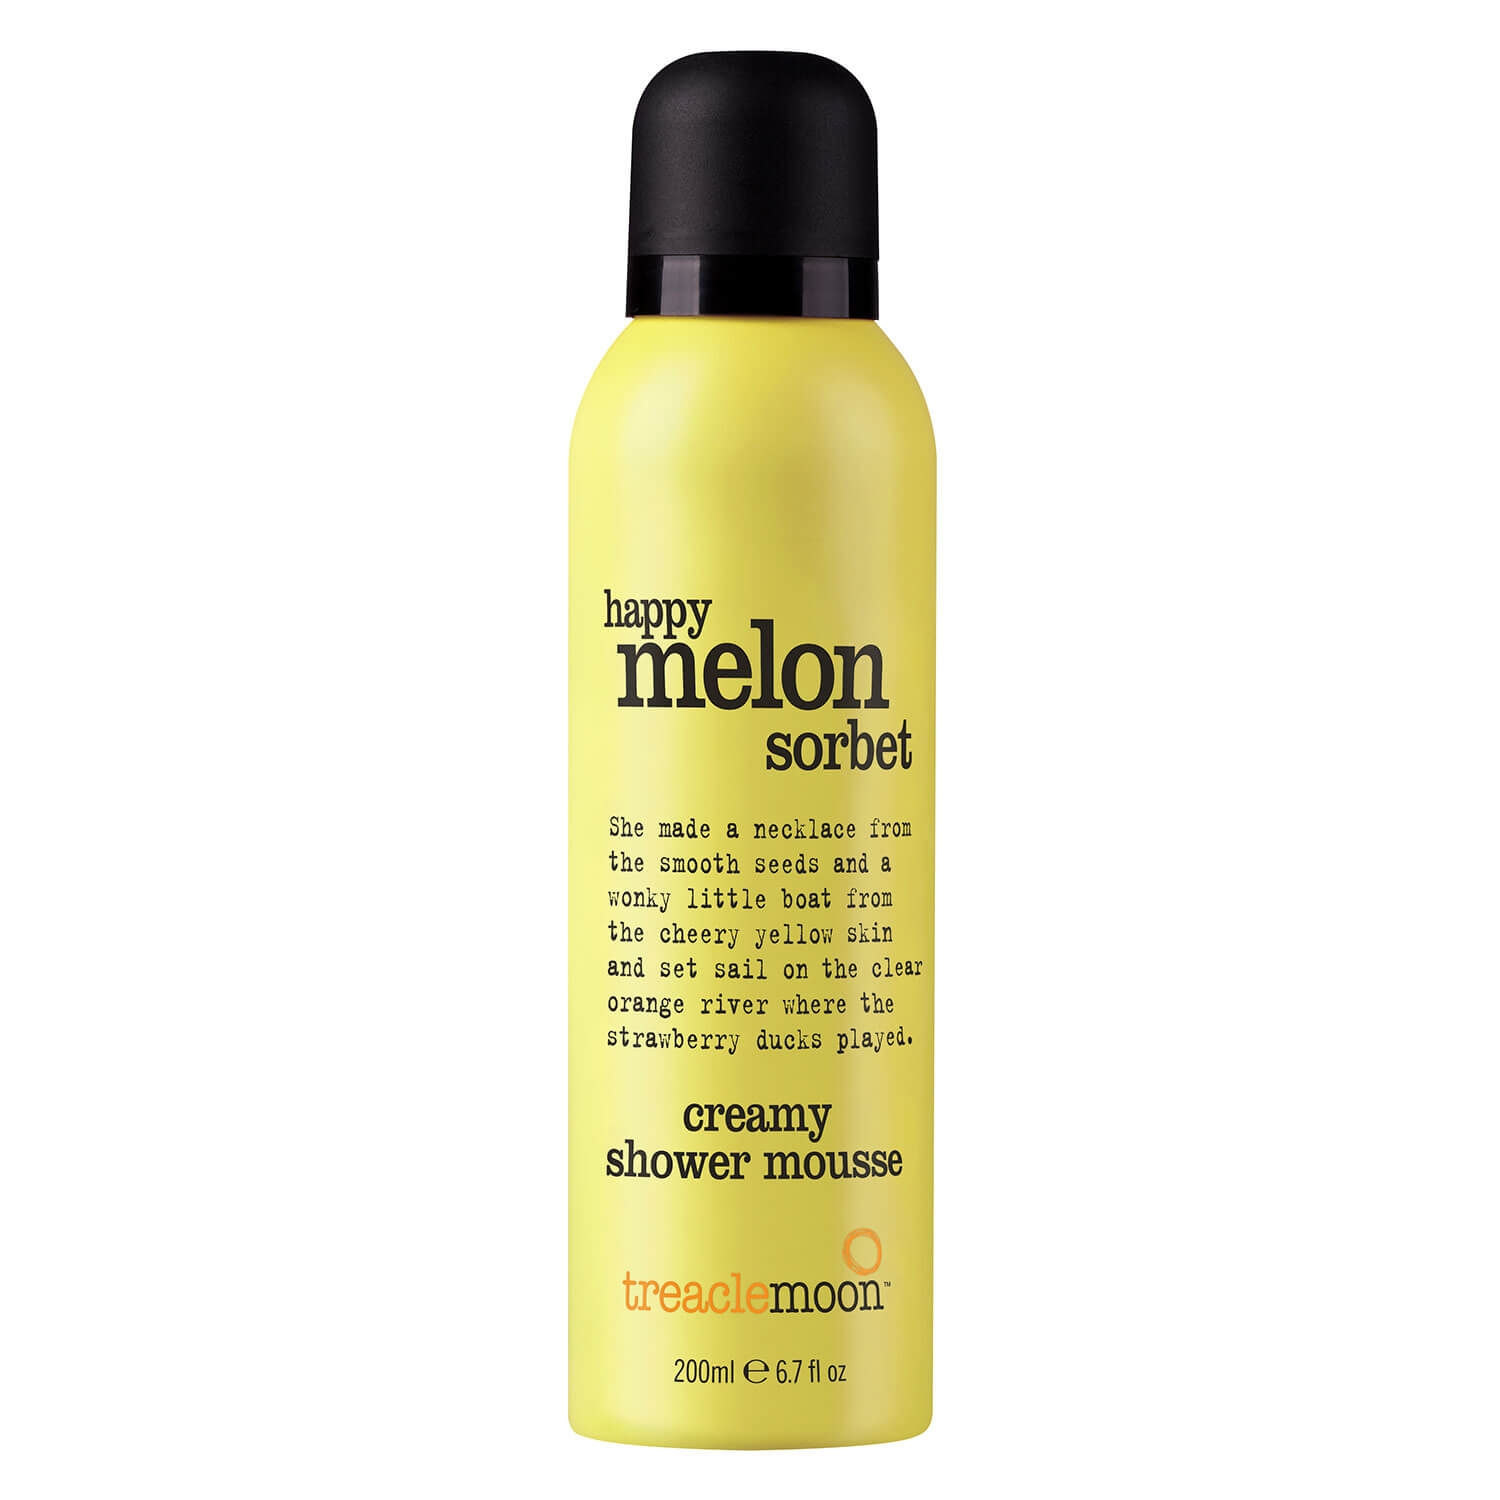 Product image from treaclemoon - happy melon sorbet creamy shower mousse